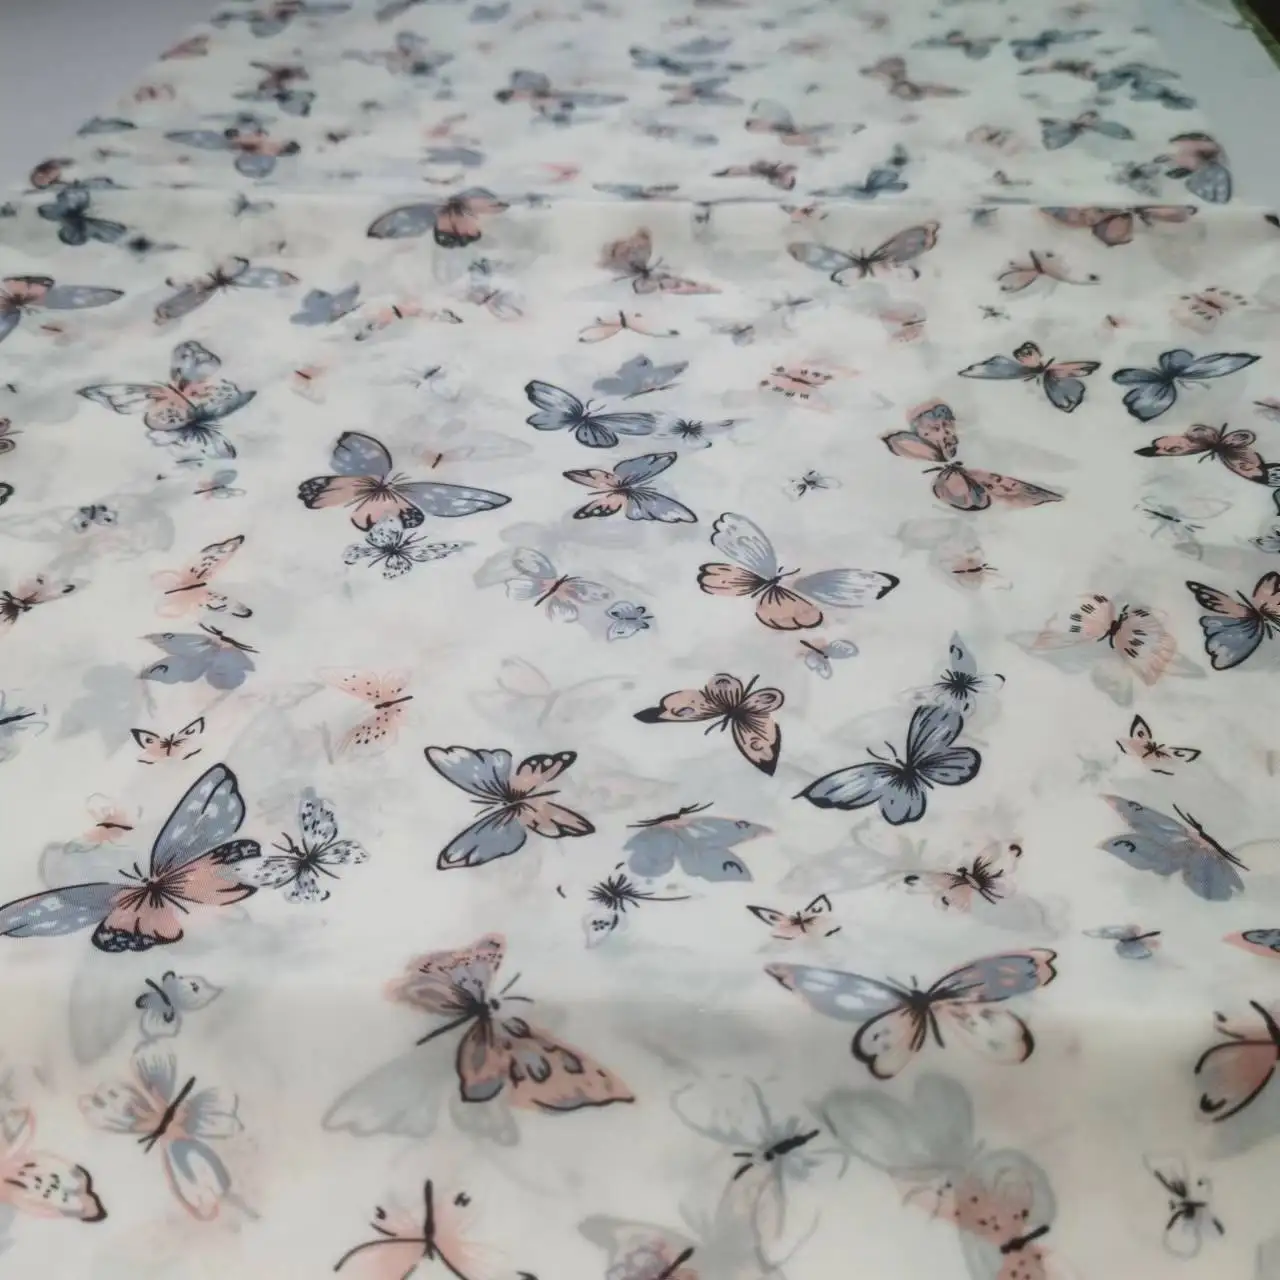 

Breathable Butterflies Printing Waterproof Fabric For Raincoat Environment Friendly Healthy Infant Diaper Pad Coverall Apron